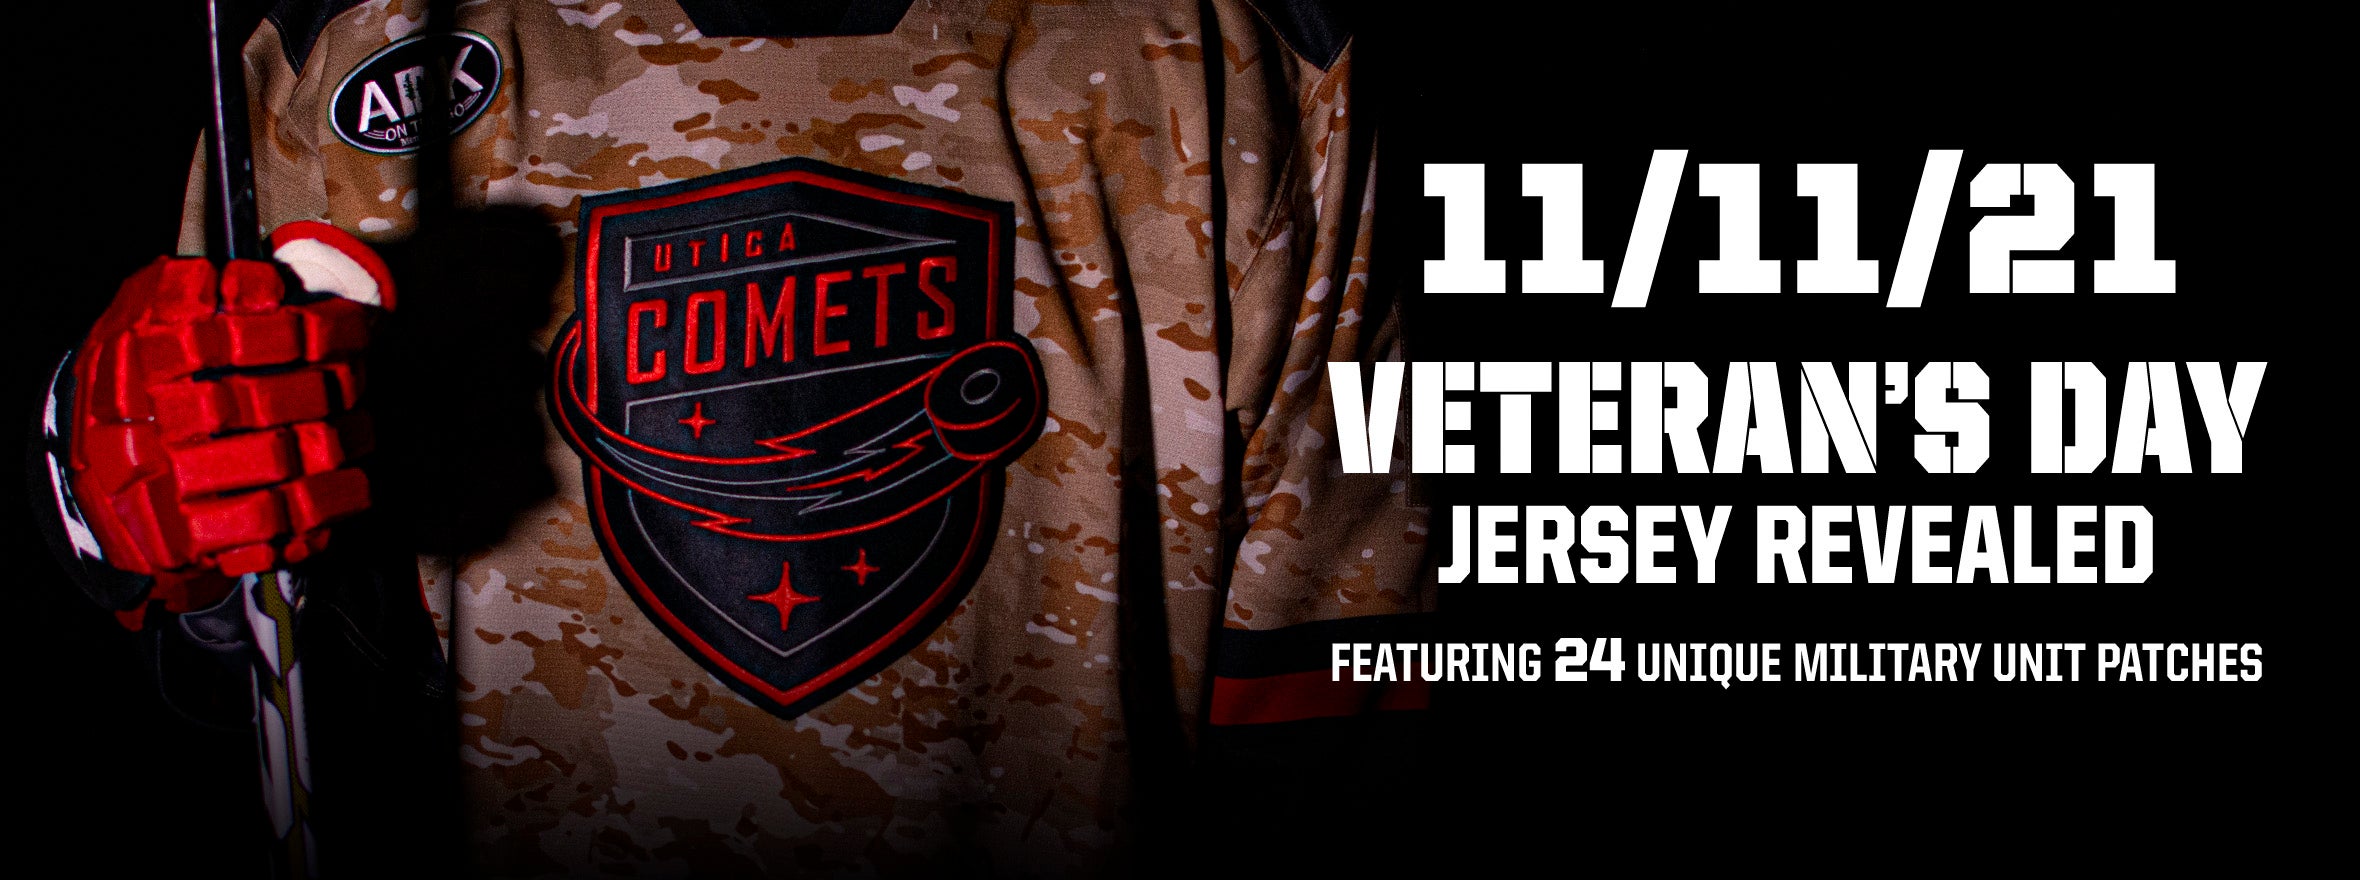 VETERAN'S DAY JERSEY AND PATCHES REVEALED